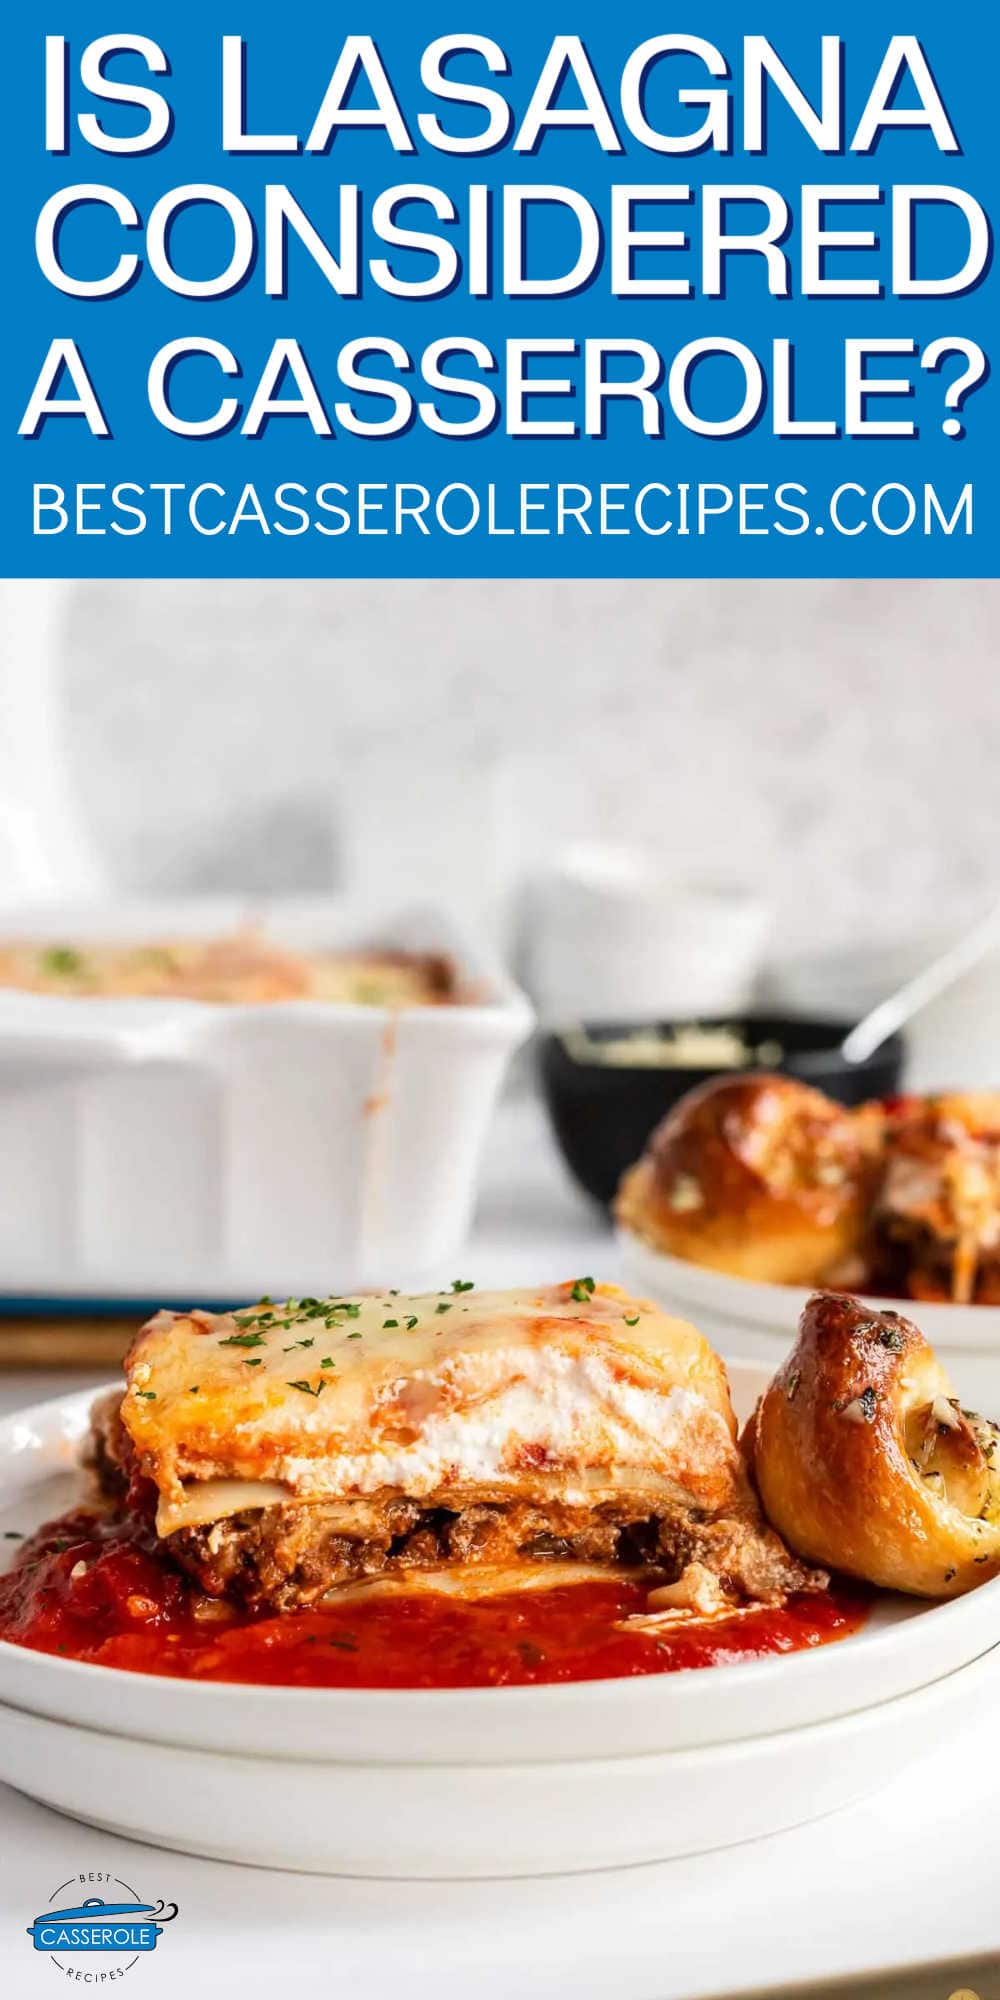 slice of lasagna with blue banner